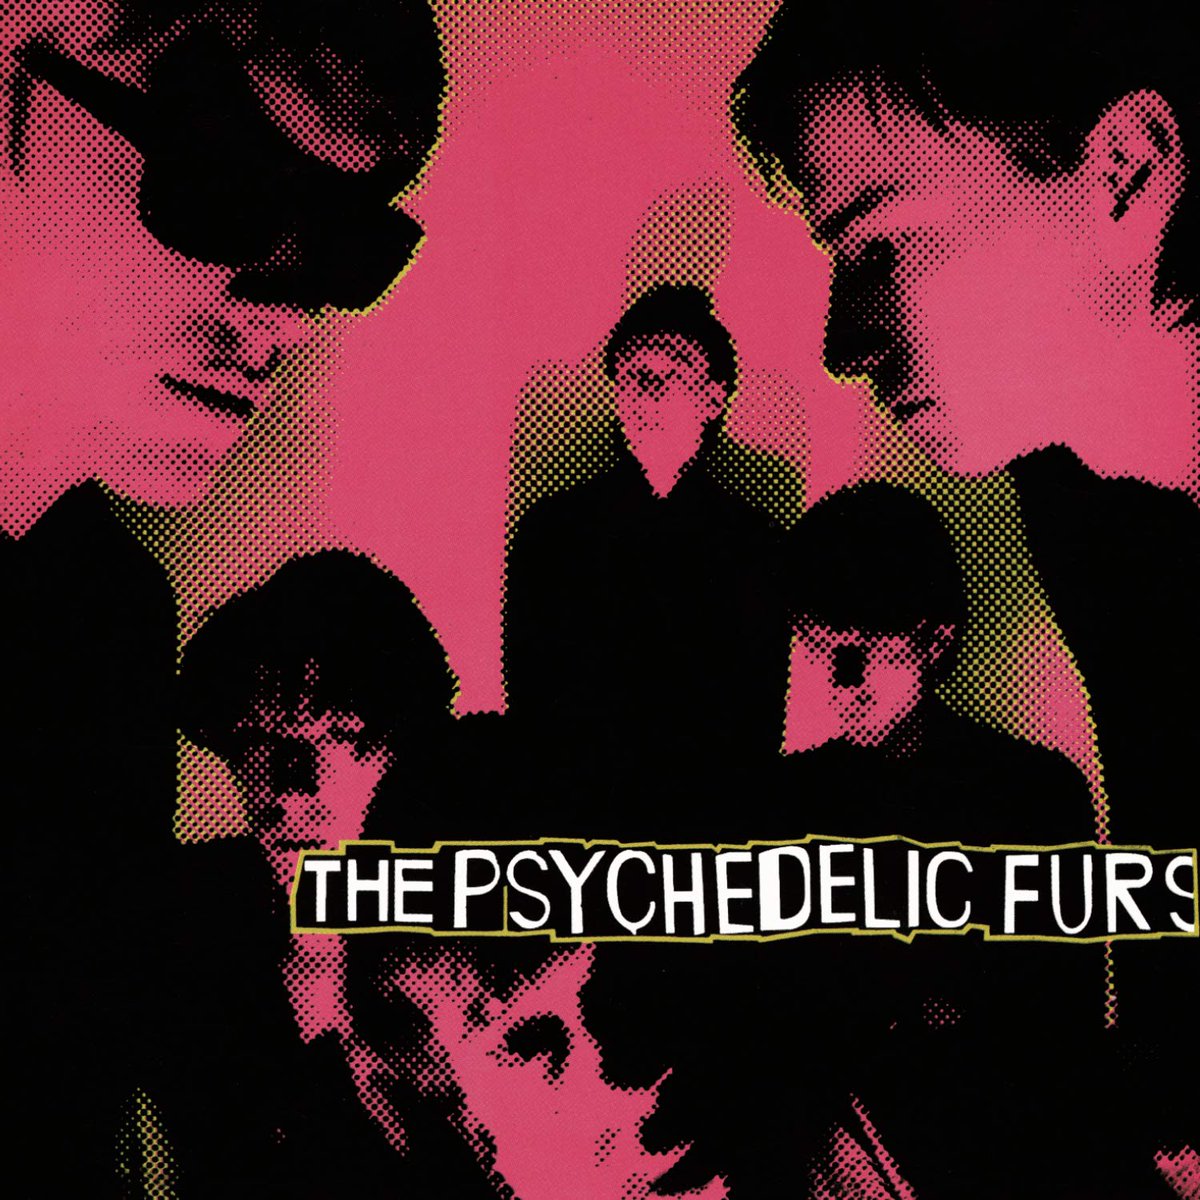 44 years ago today 
The Psychedelic Furs is the debut studio album by English postpunk band the Psychedelic Furs, released on this day in 1980.

#punk #punkrock #postpunk #postpunkmusic #psychedelicfurs #history #punkrockhistory